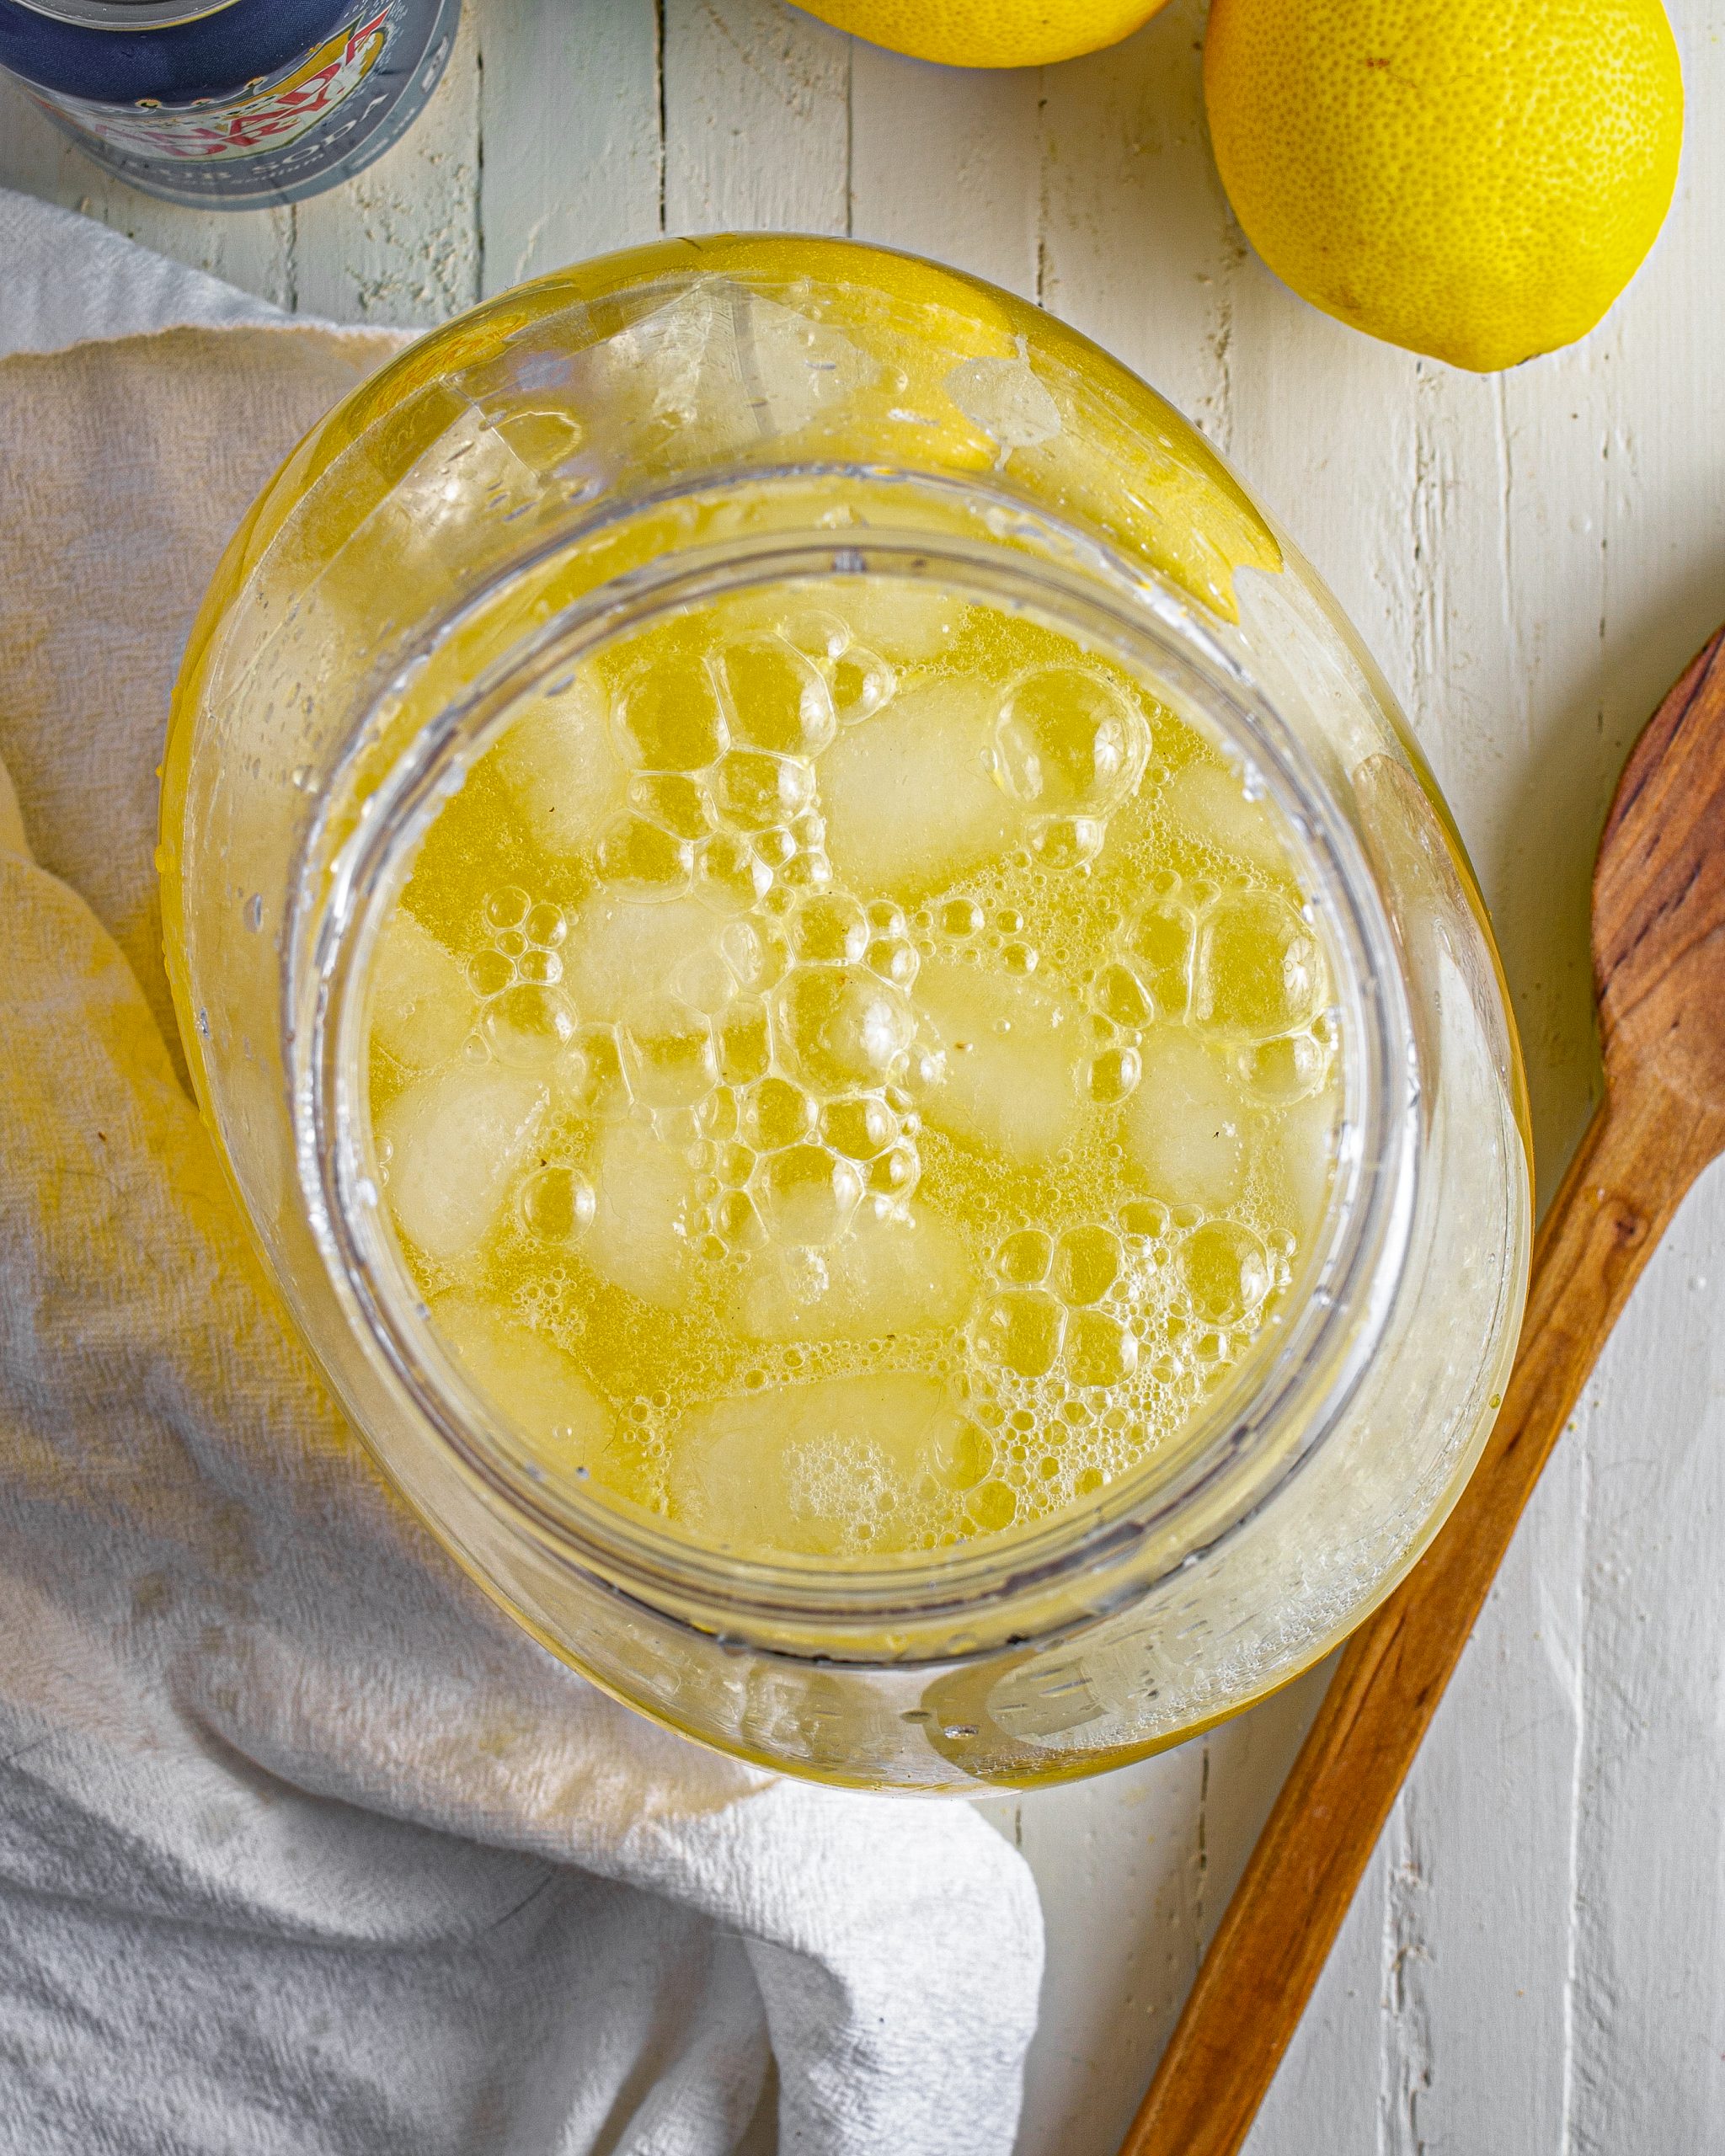 Mix the pineapple juice, sparkling water, and lemon juice into the pitcher. Stir to combine the ingredients well. 